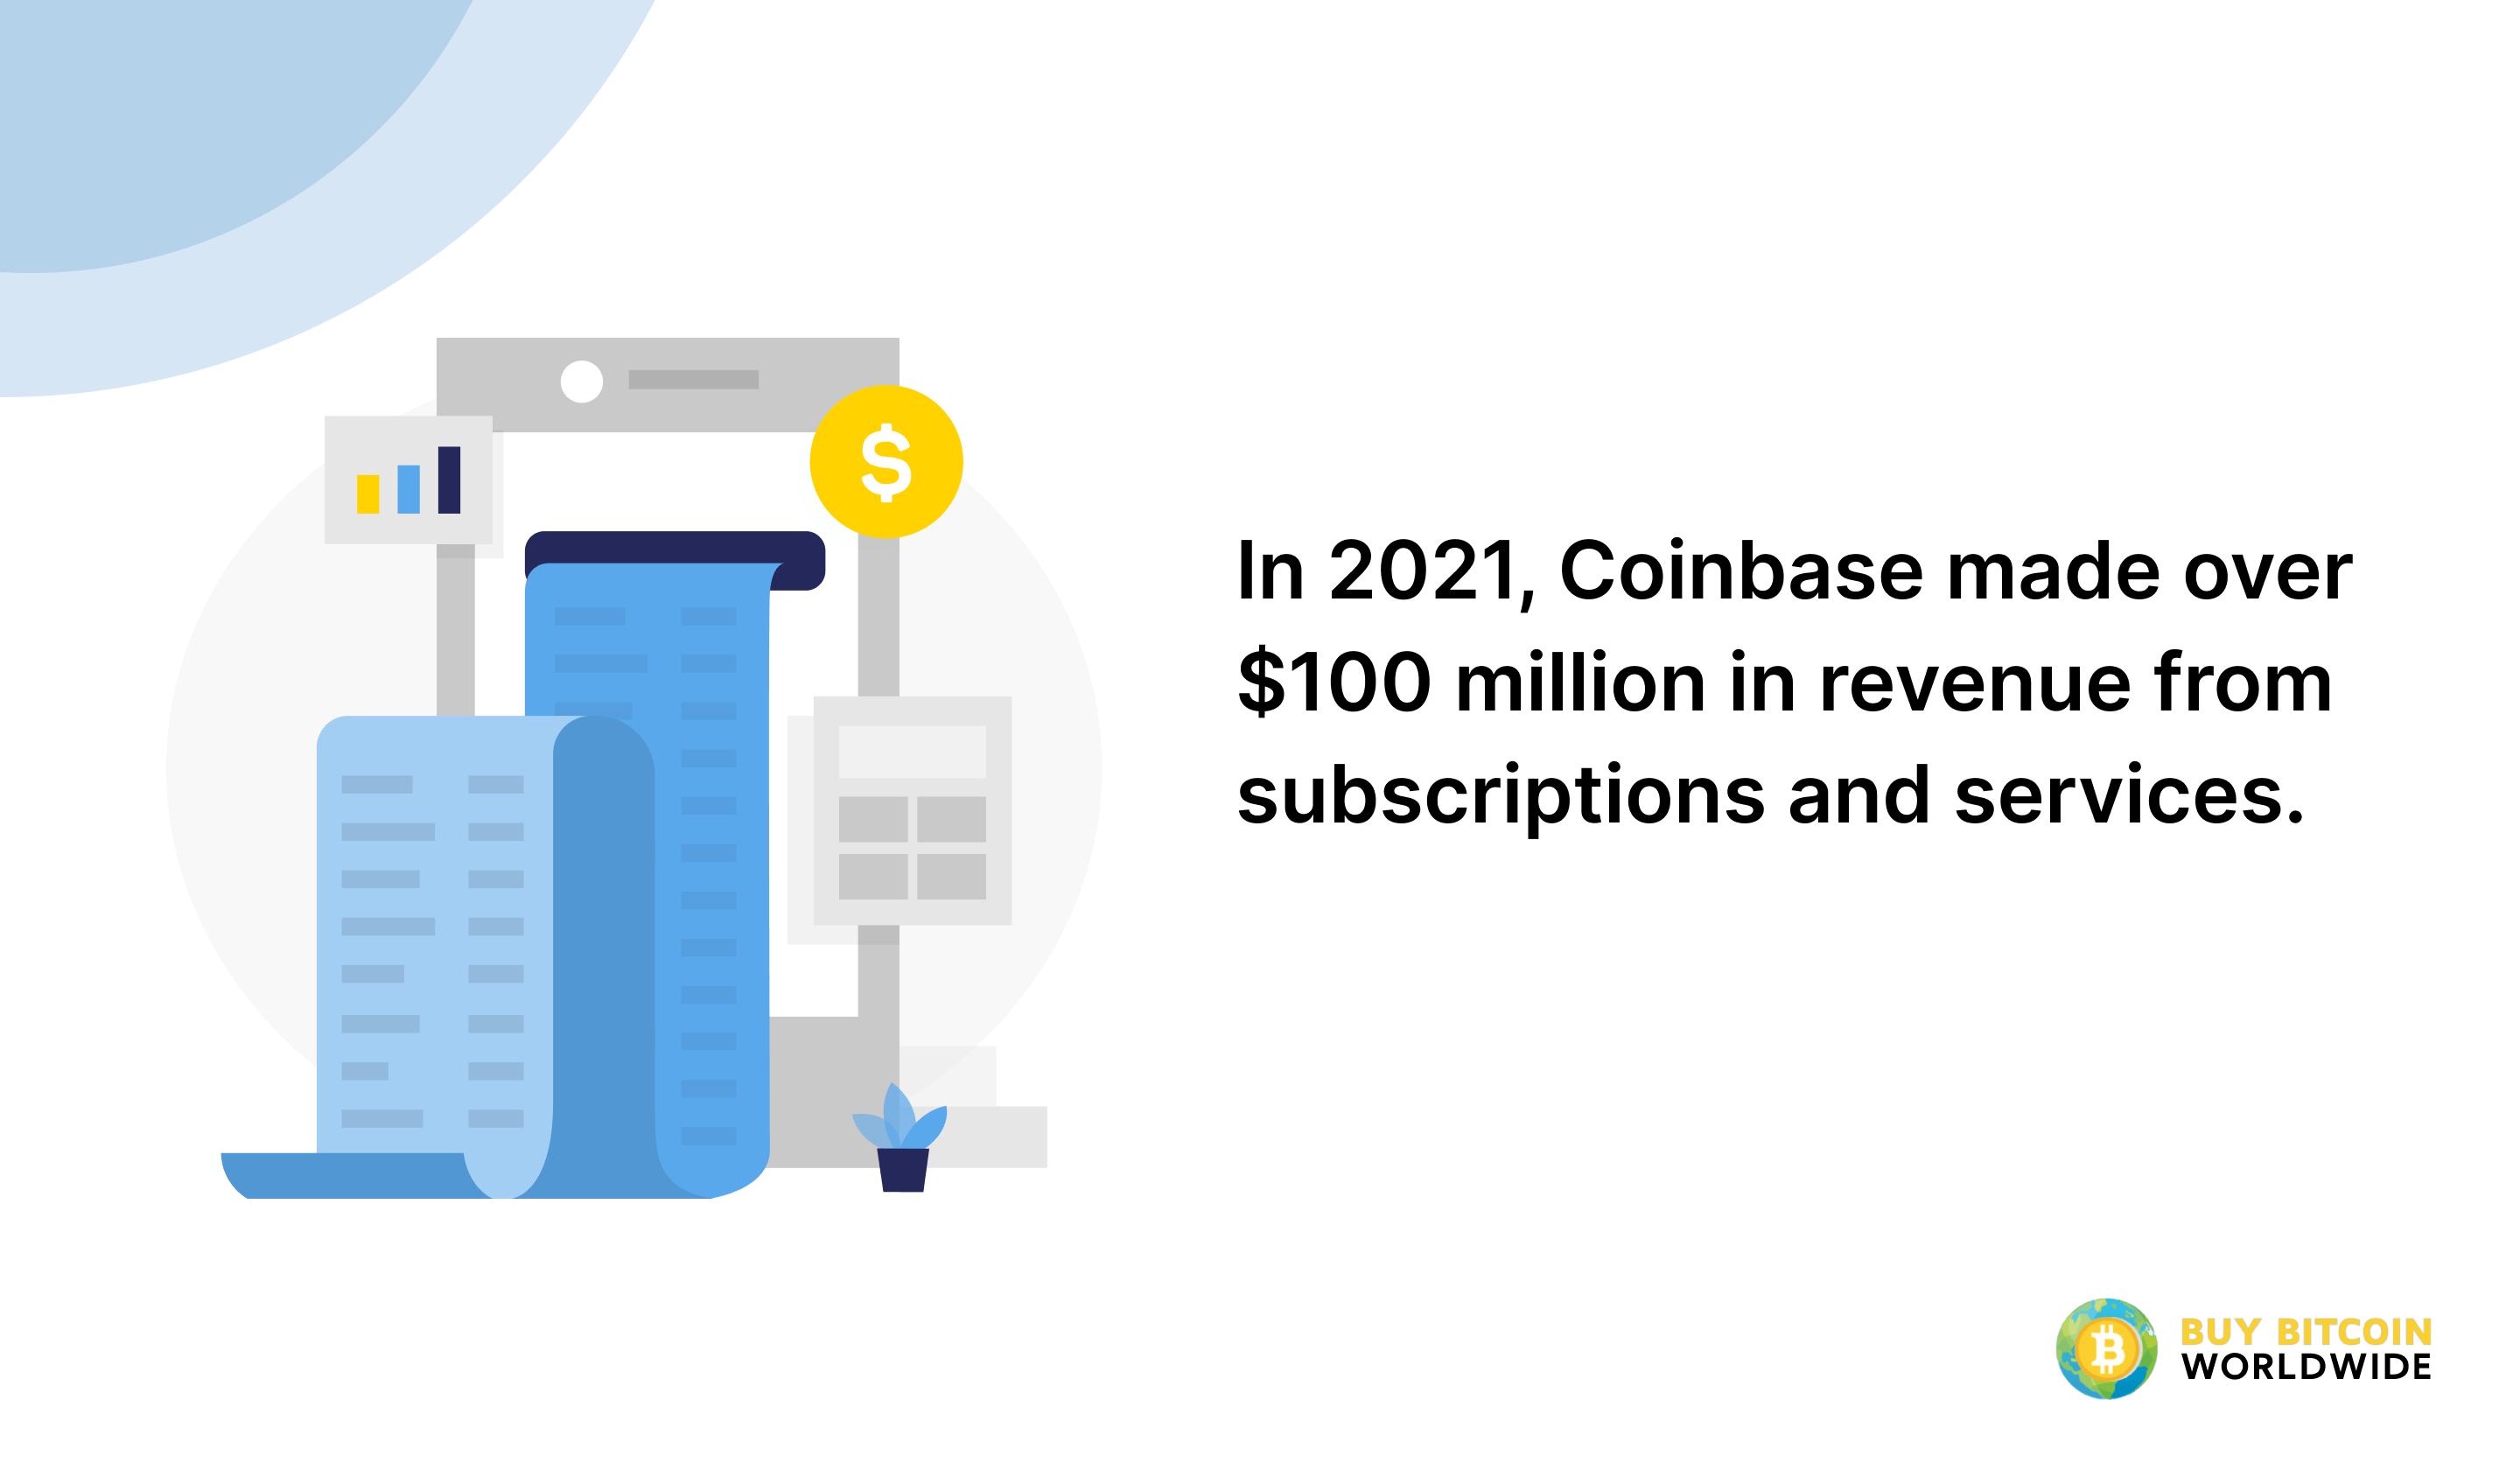 coinbase revenue from subscriptions and services